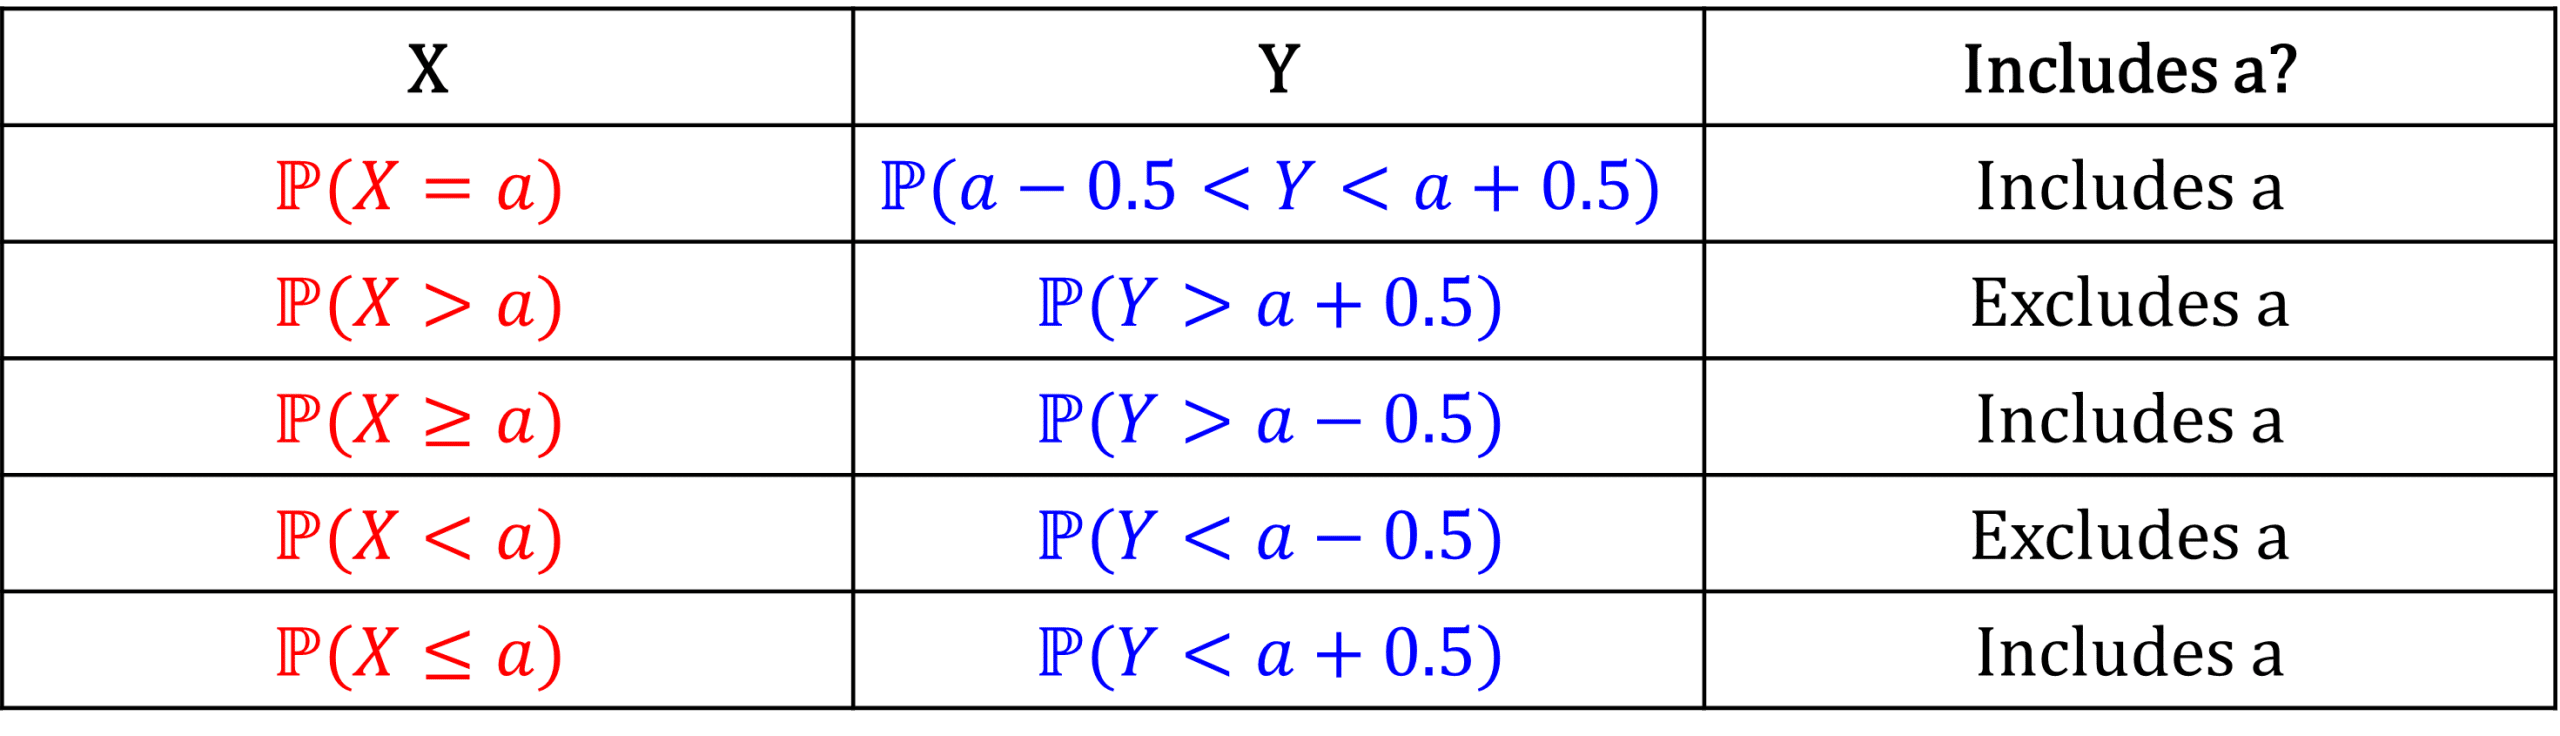 hypothesis test normal approximation to binomial